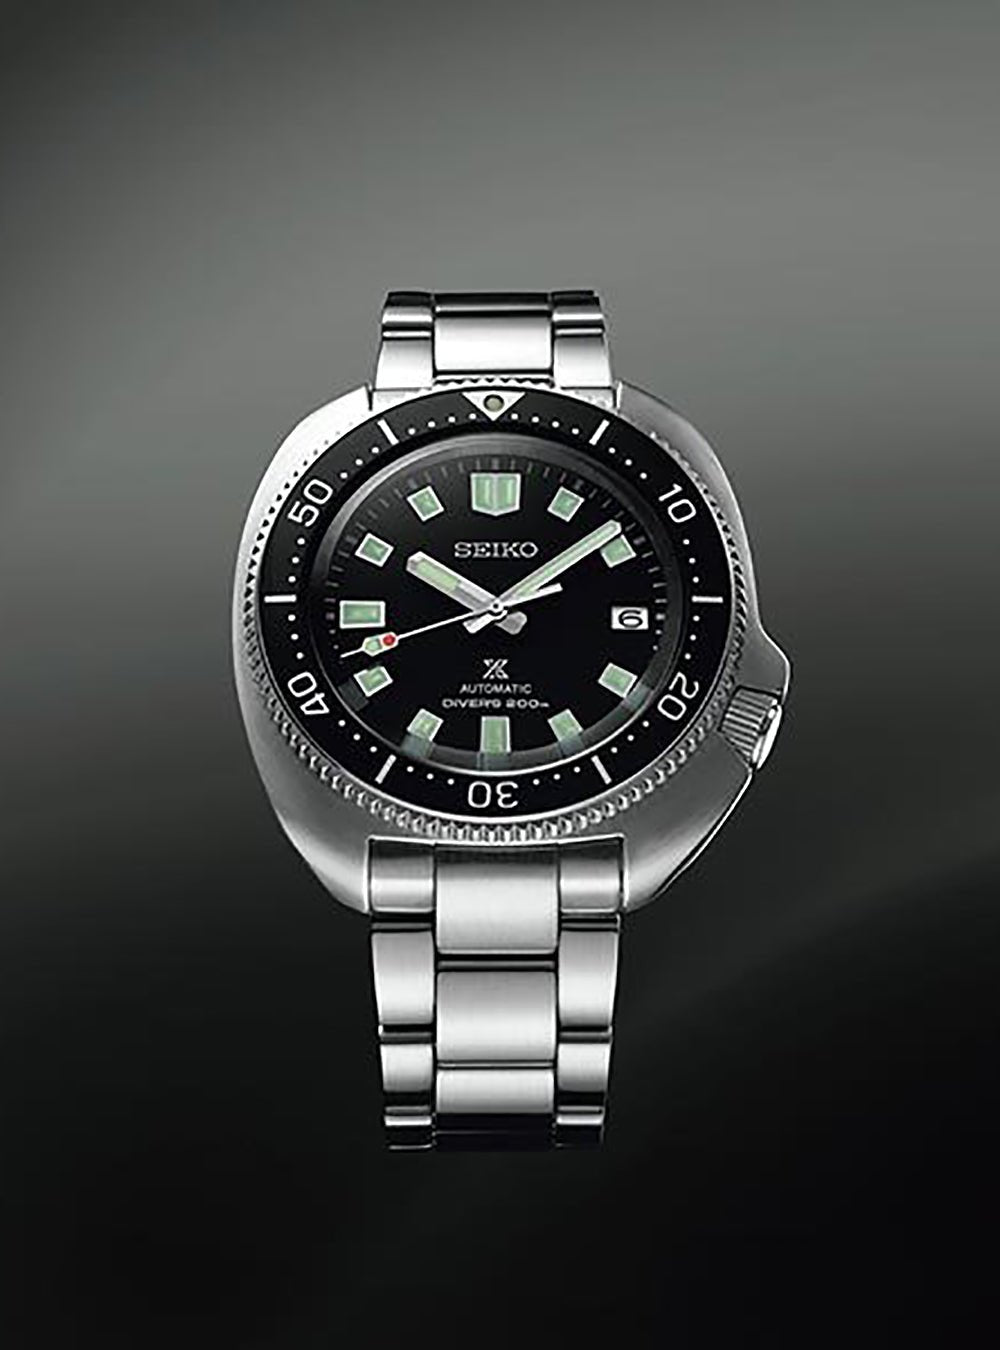 SEIKO PROSPEX 200M DIVER AUTOMATIC SBDC109 MADE IN JAPAN JDM